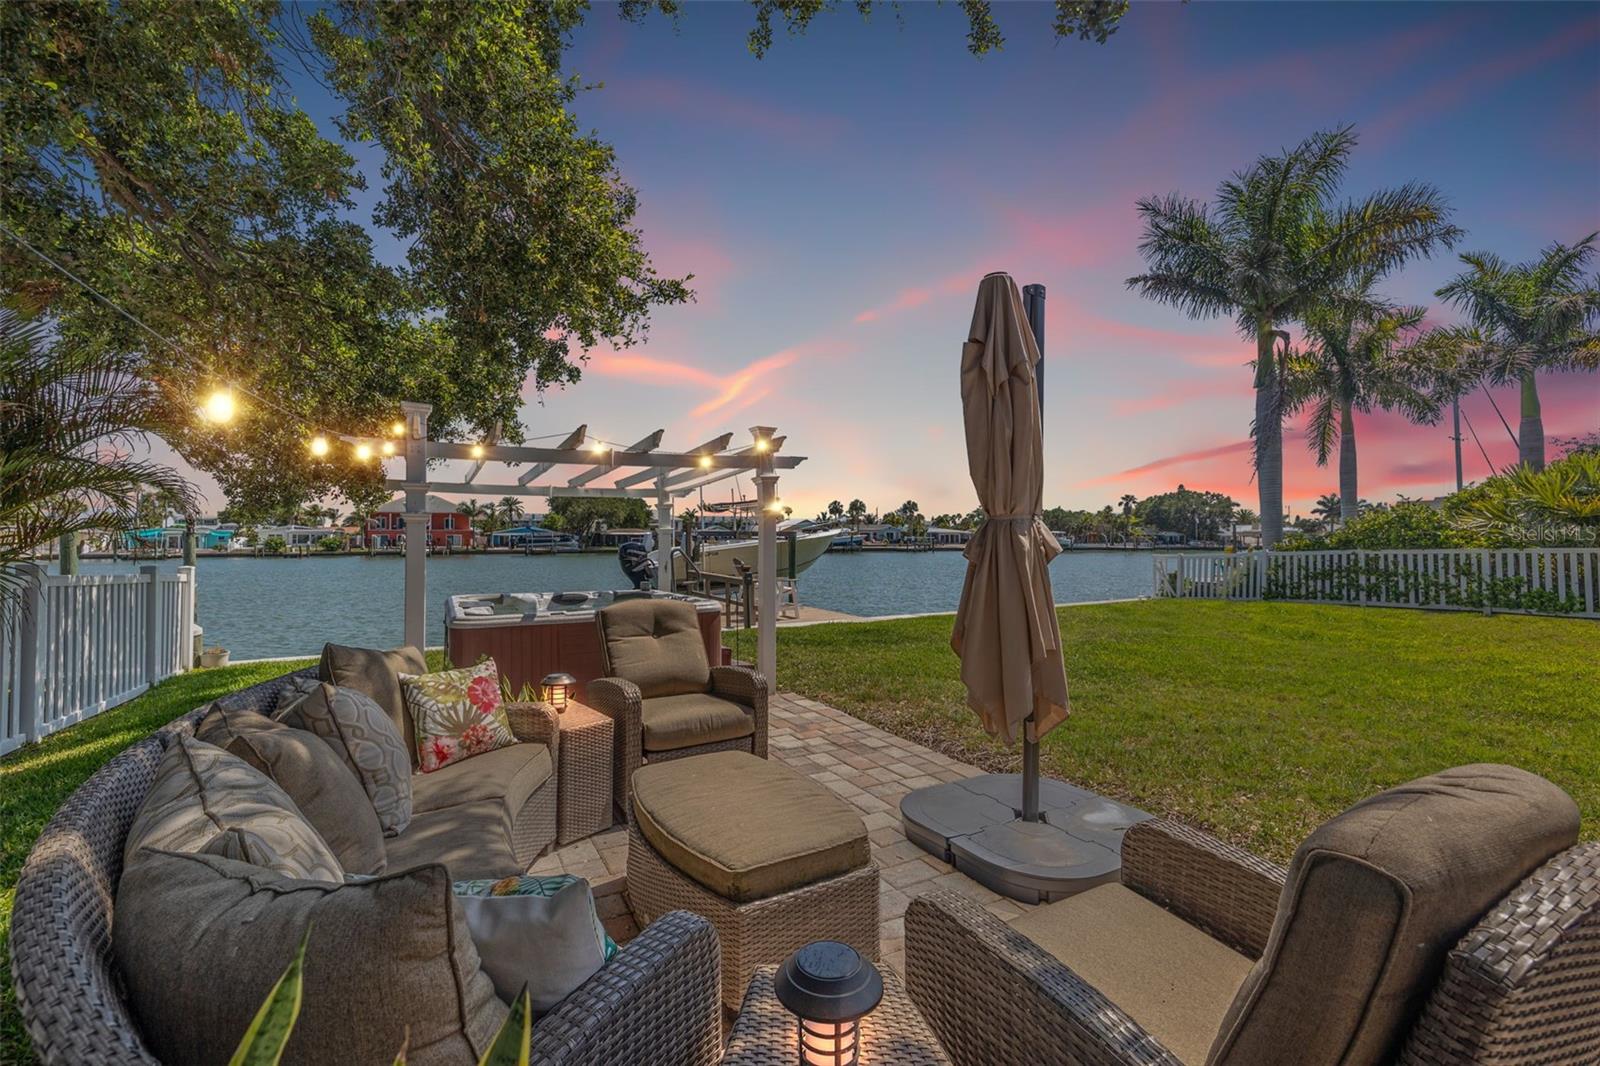 Vacation every day with these intracoastal water views and beautiful backyard